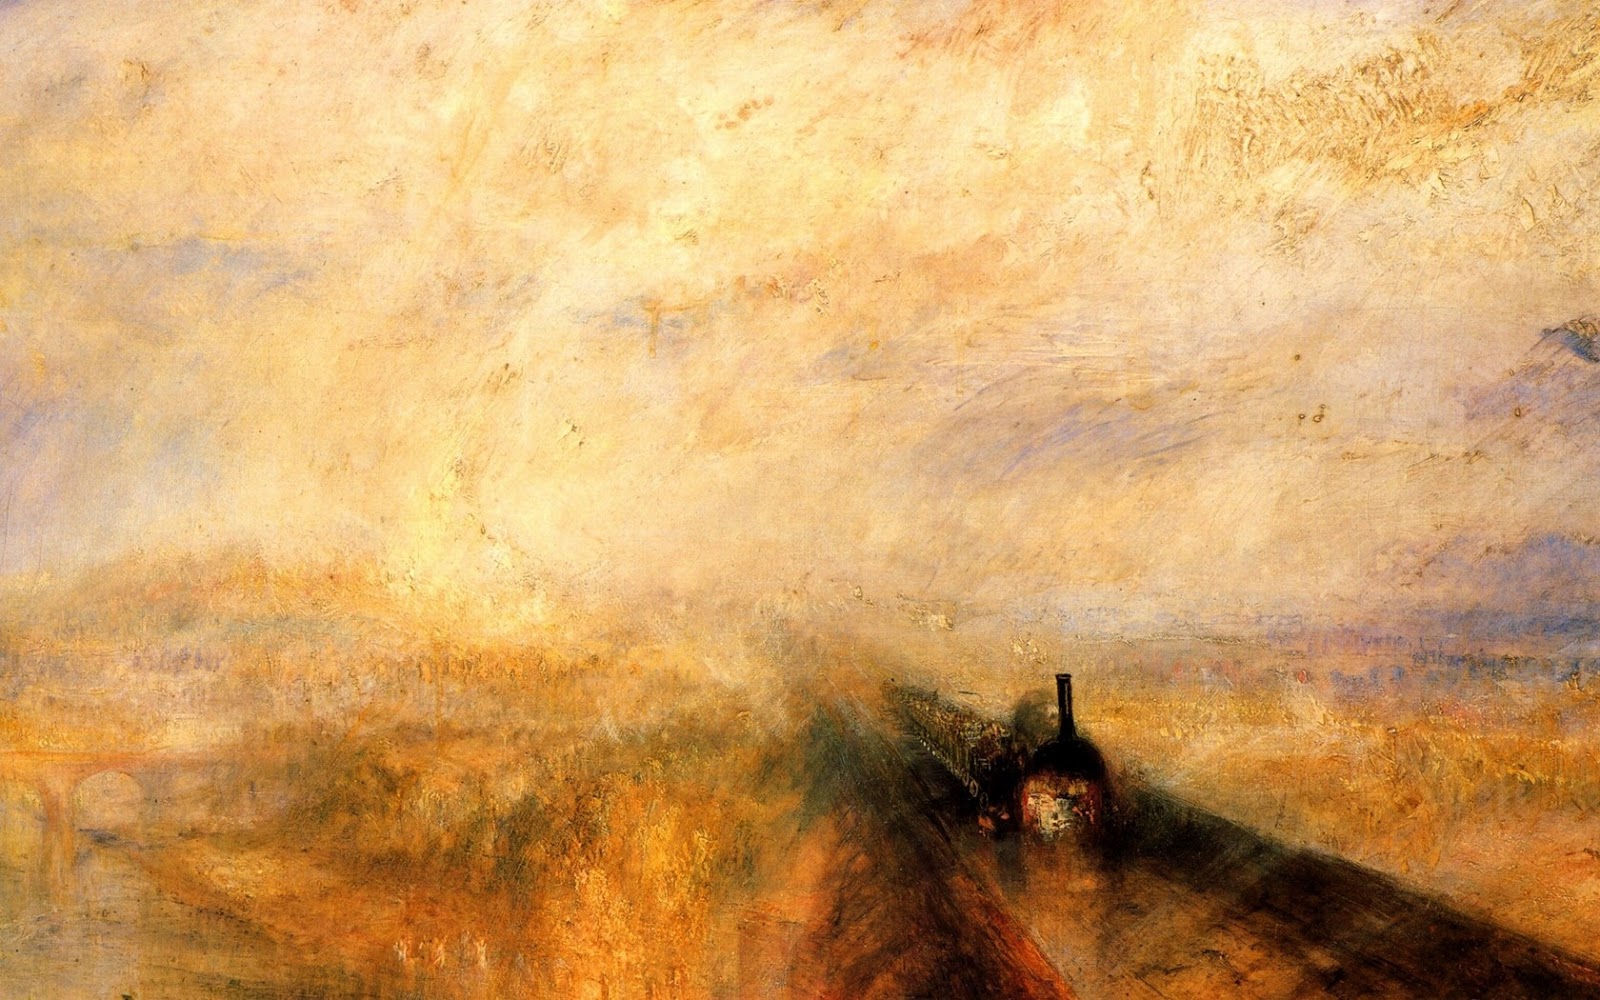 Masterpieces+Art+Paintings+Hd+Wallpapers+(Vol.03+)+Fine+Art+Painting+Turner,+Joseph+Mallord+William+Rain,+Speed+And+Steam,+1844+,+London,+National+Gallery+Of+Art